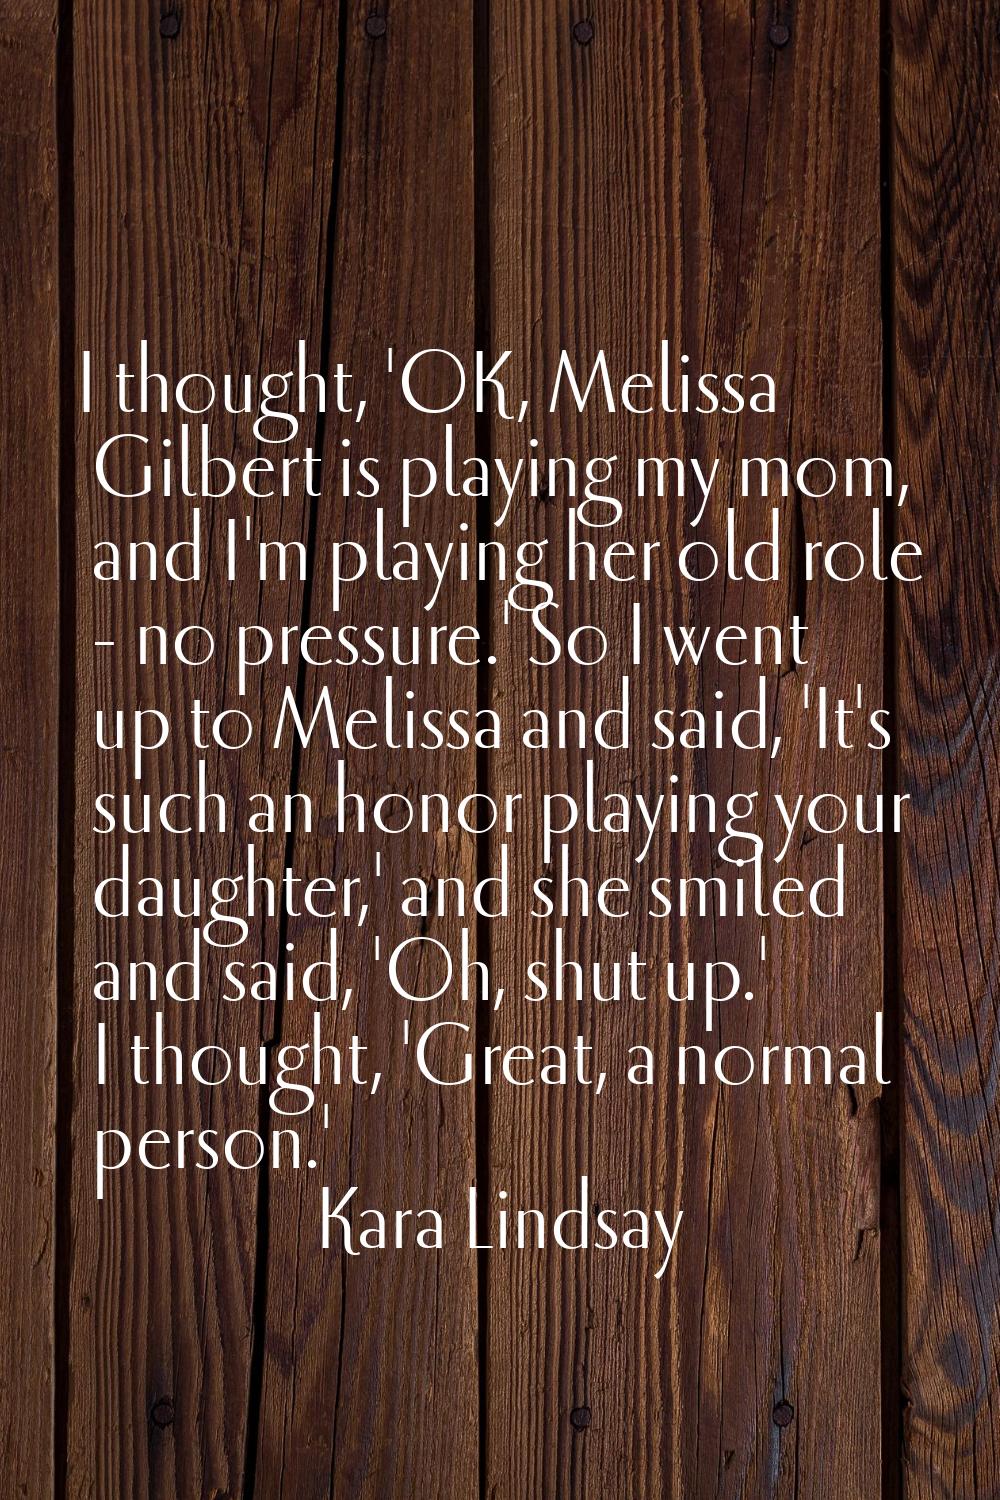 I thought, 'OK, Melissa Gilbert is playing my mom, and I'm playing her old role - no pressure.' So 